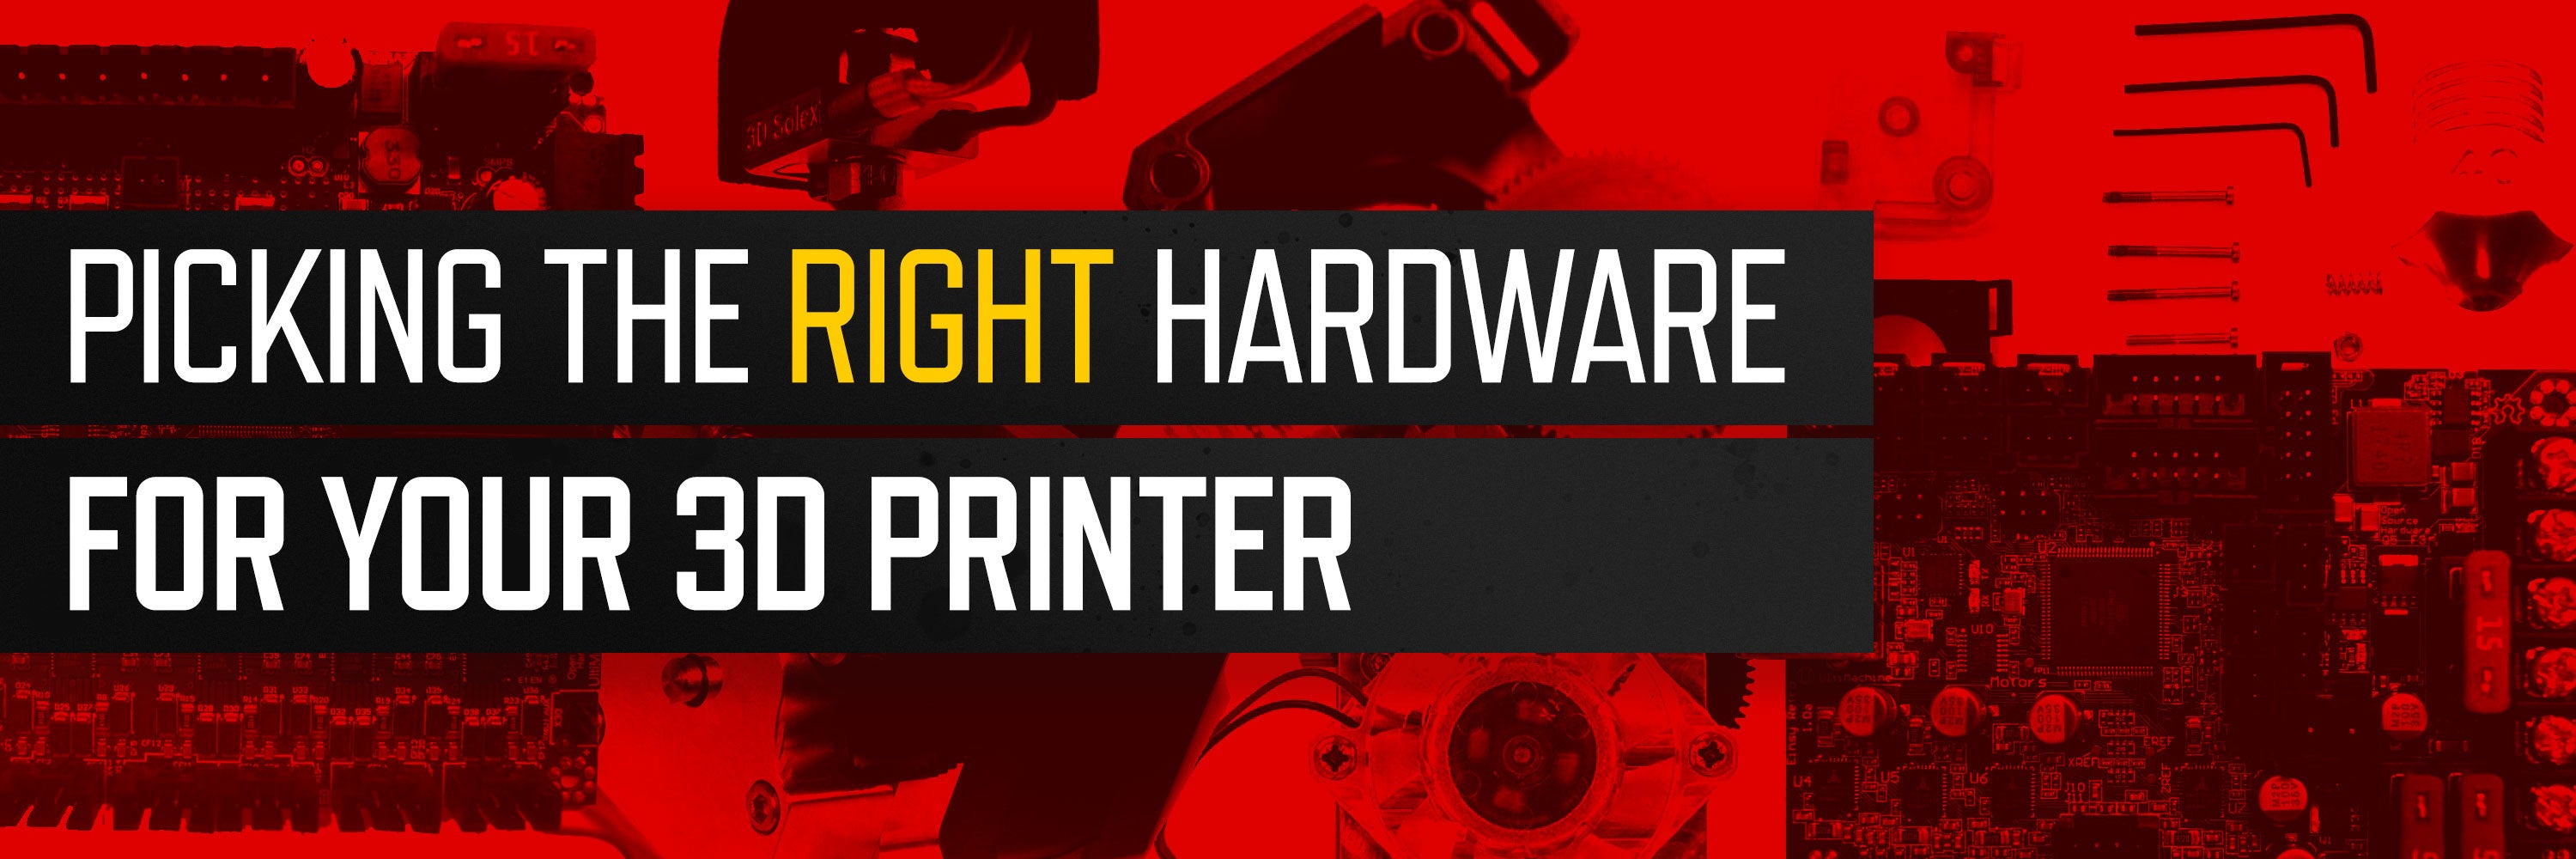 Picking the right hardware for your 3D printer.